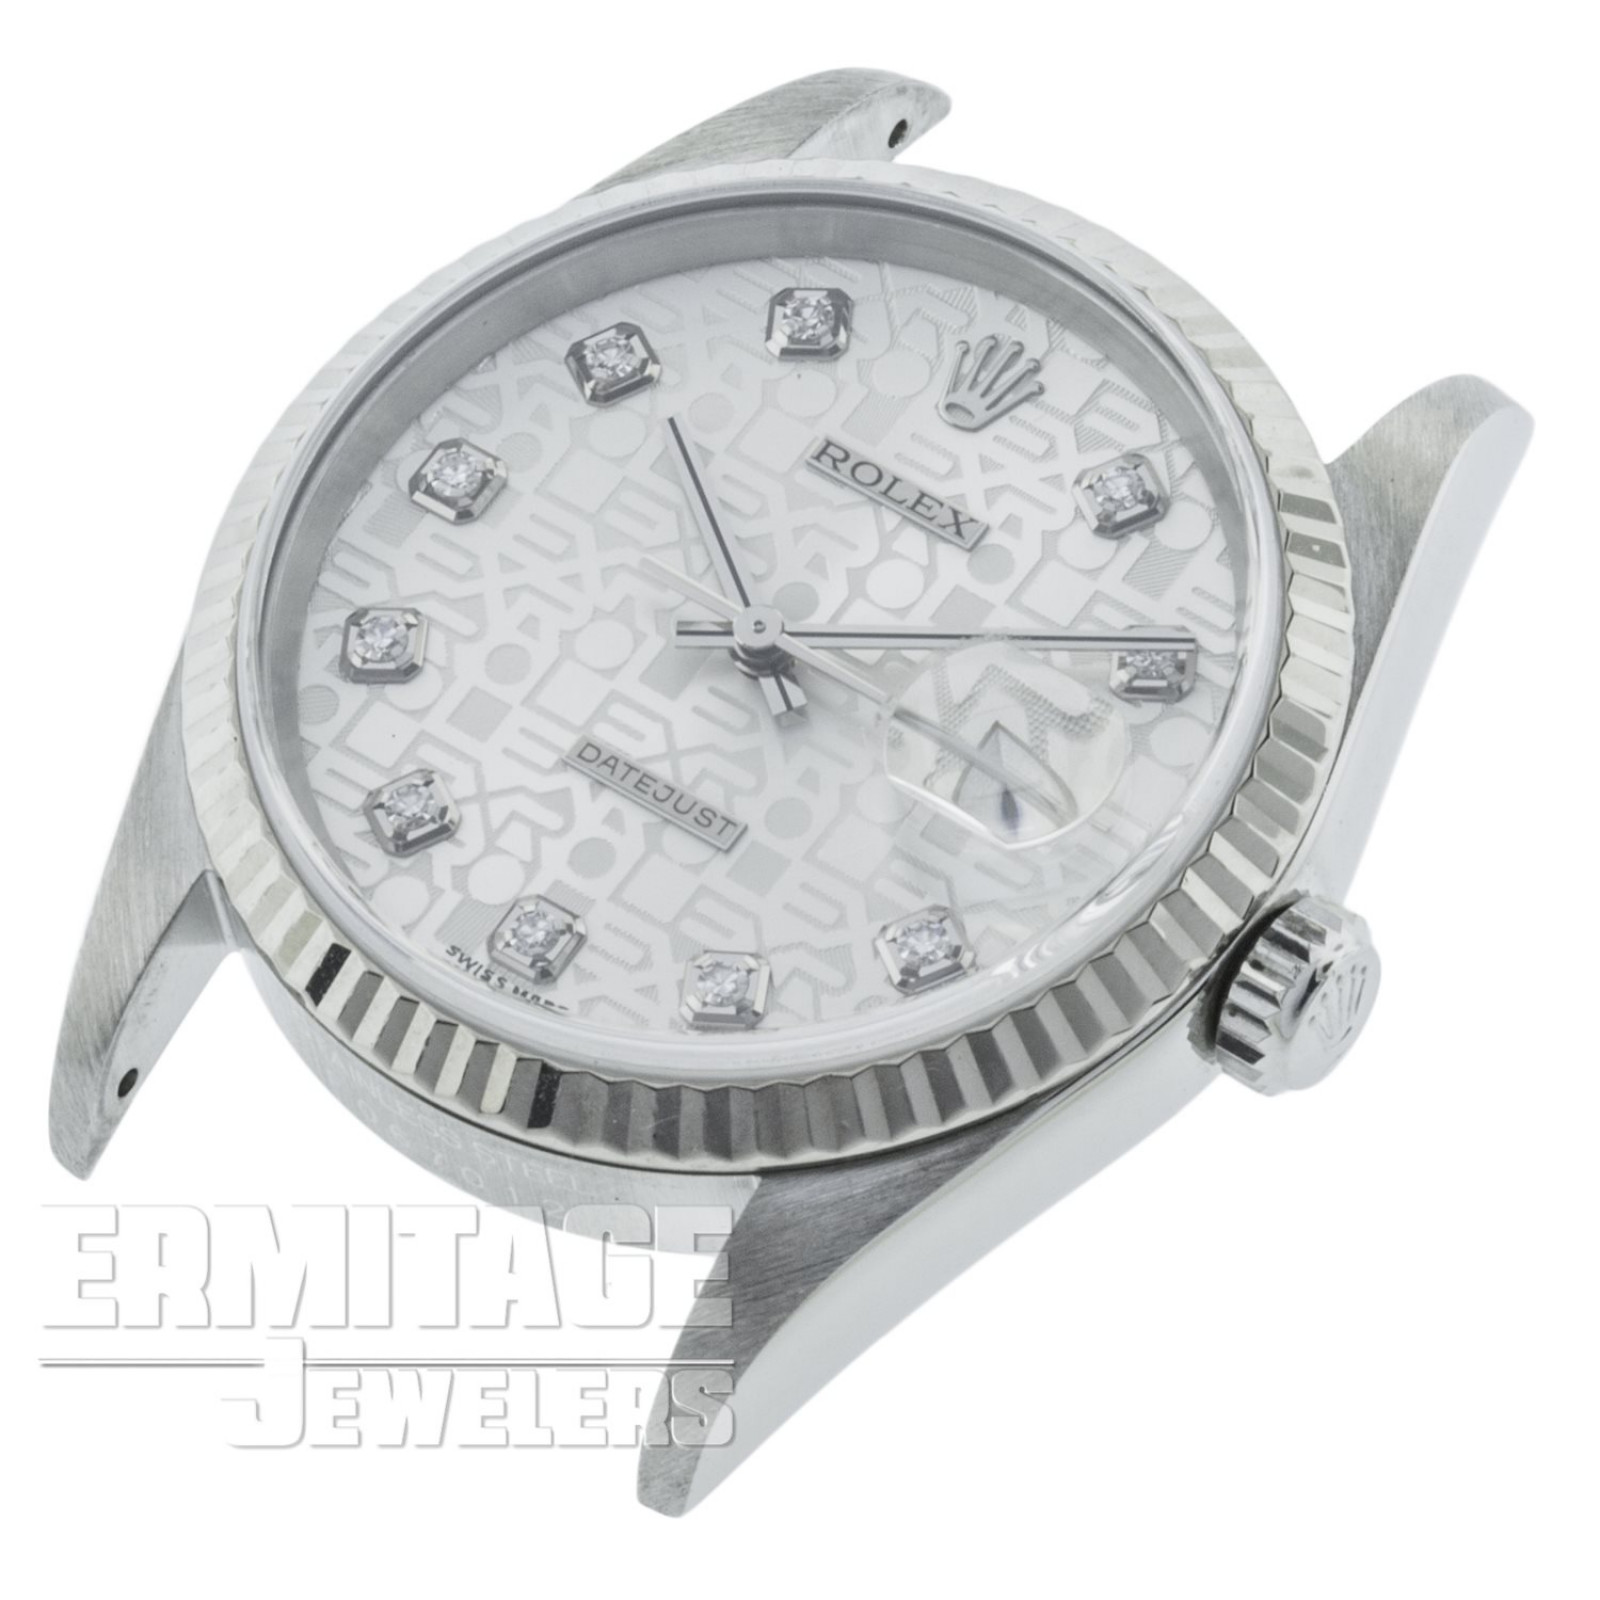 Steel on Oyster Rolex Datejust 16234 36 mm